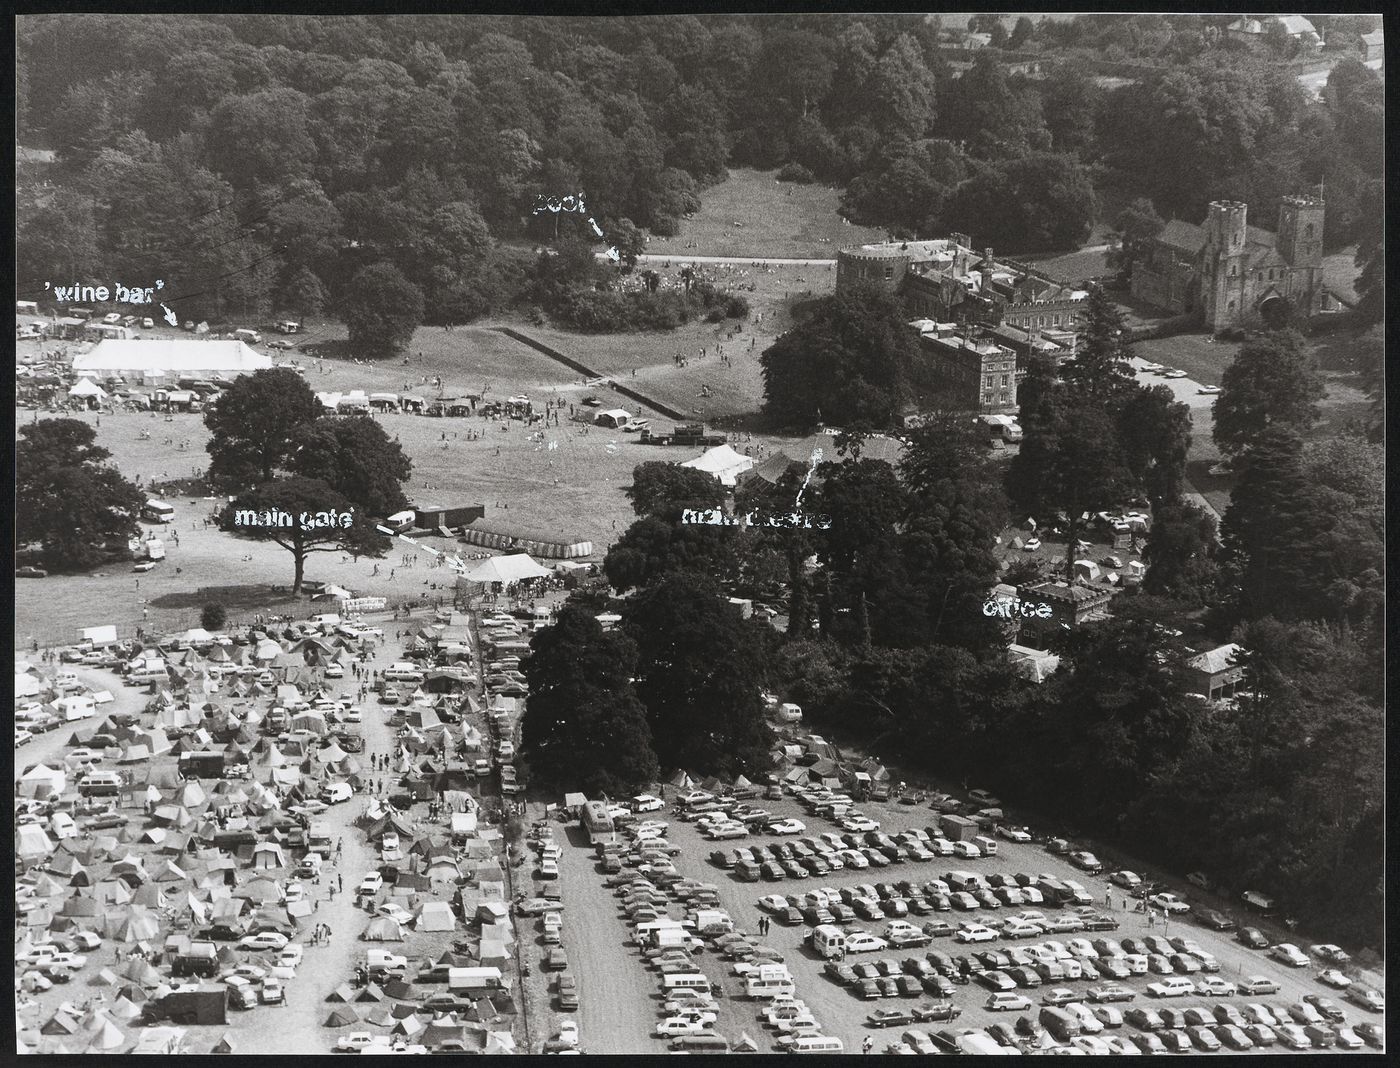 Aerial view of the Elephant Fayre festival in Port Eliot, England, showing wine bar, pool, main gate, office and main theatre